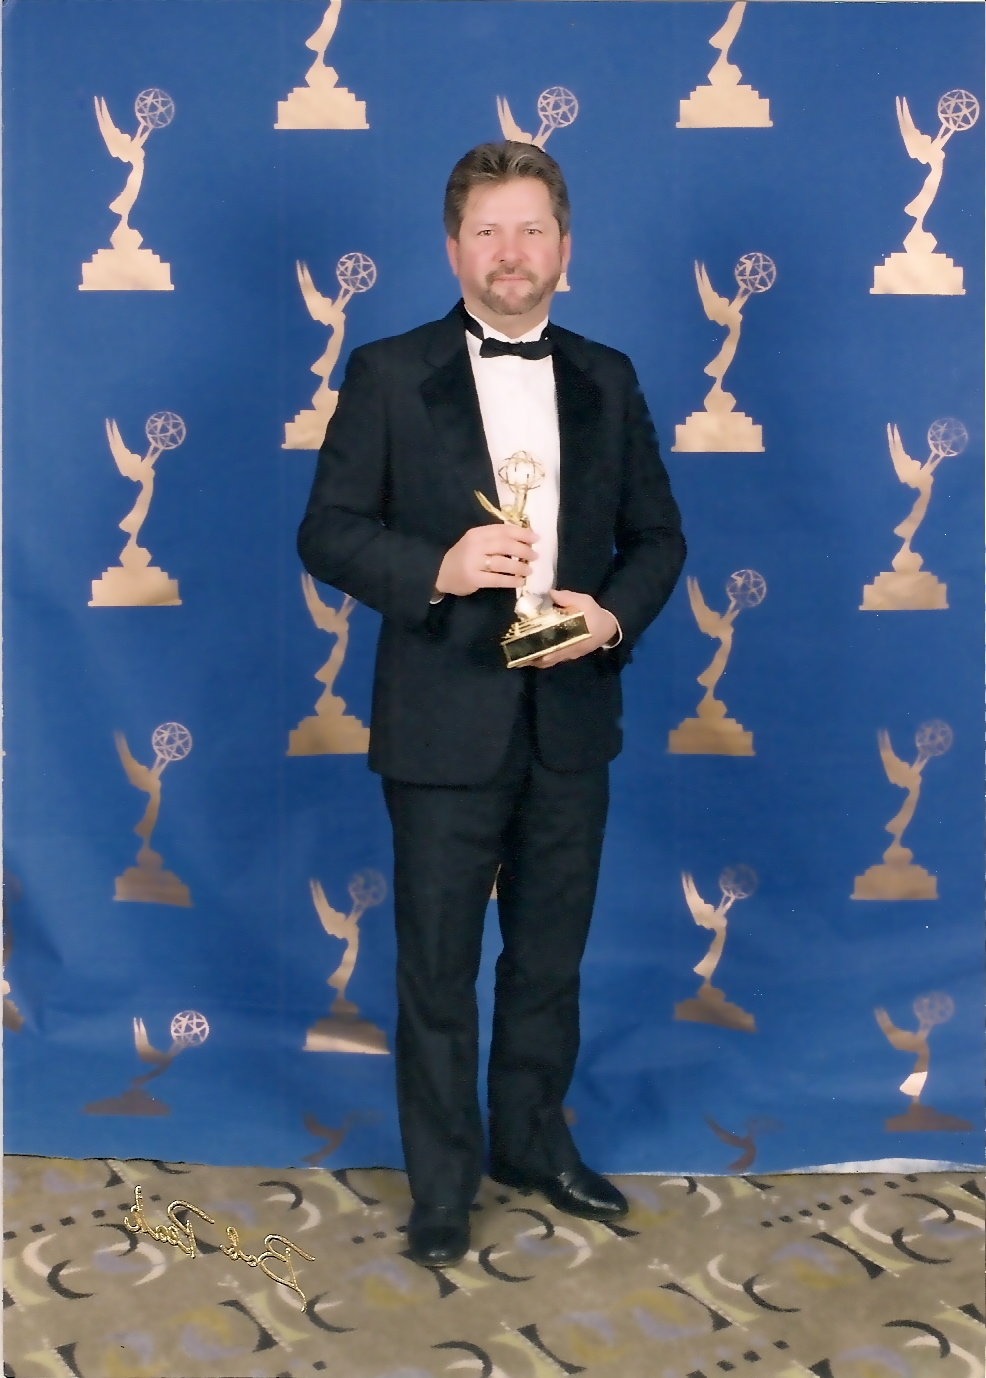 Douglas Wester receiving Emmy Award as Senior Producer for Outstanding Informational Programming, 2003